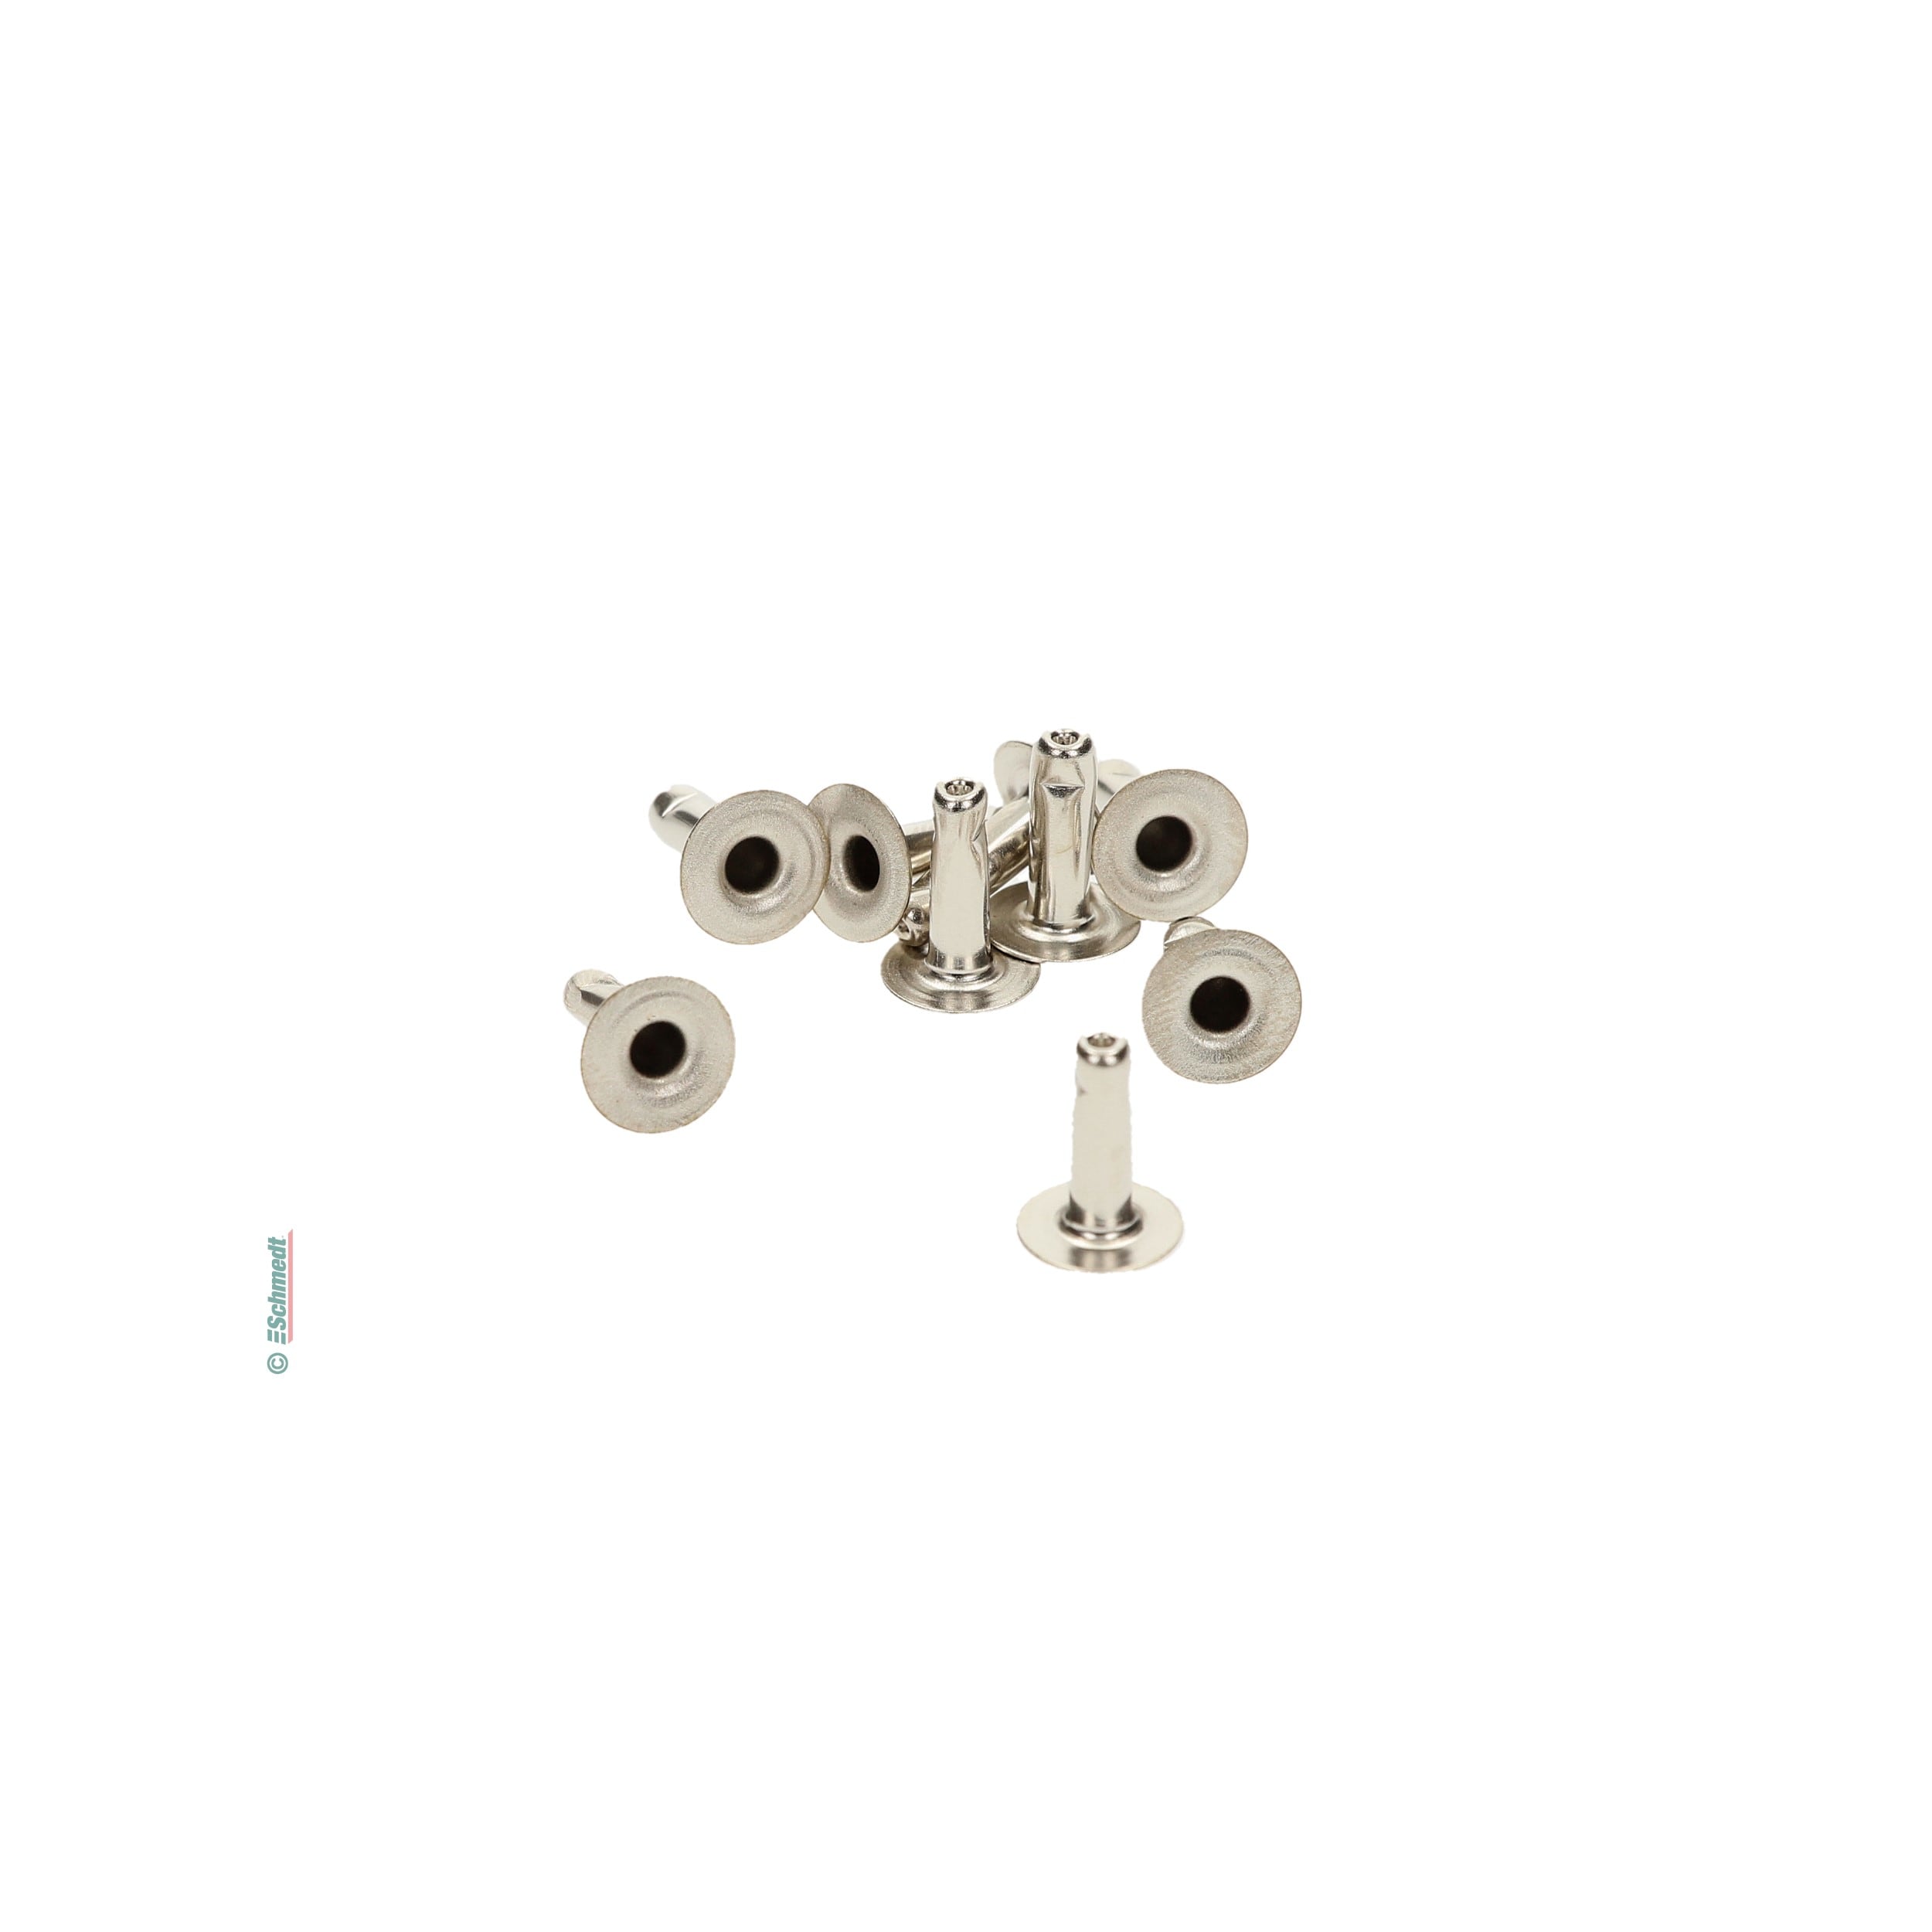 Male piece of two-piece rivets - Shaft Ø (in mm) 4.0 - Shaft length (in mm) 8.0 - Head Ø (in mm) 7.0 - Hollow rivets always consist of 2 par...